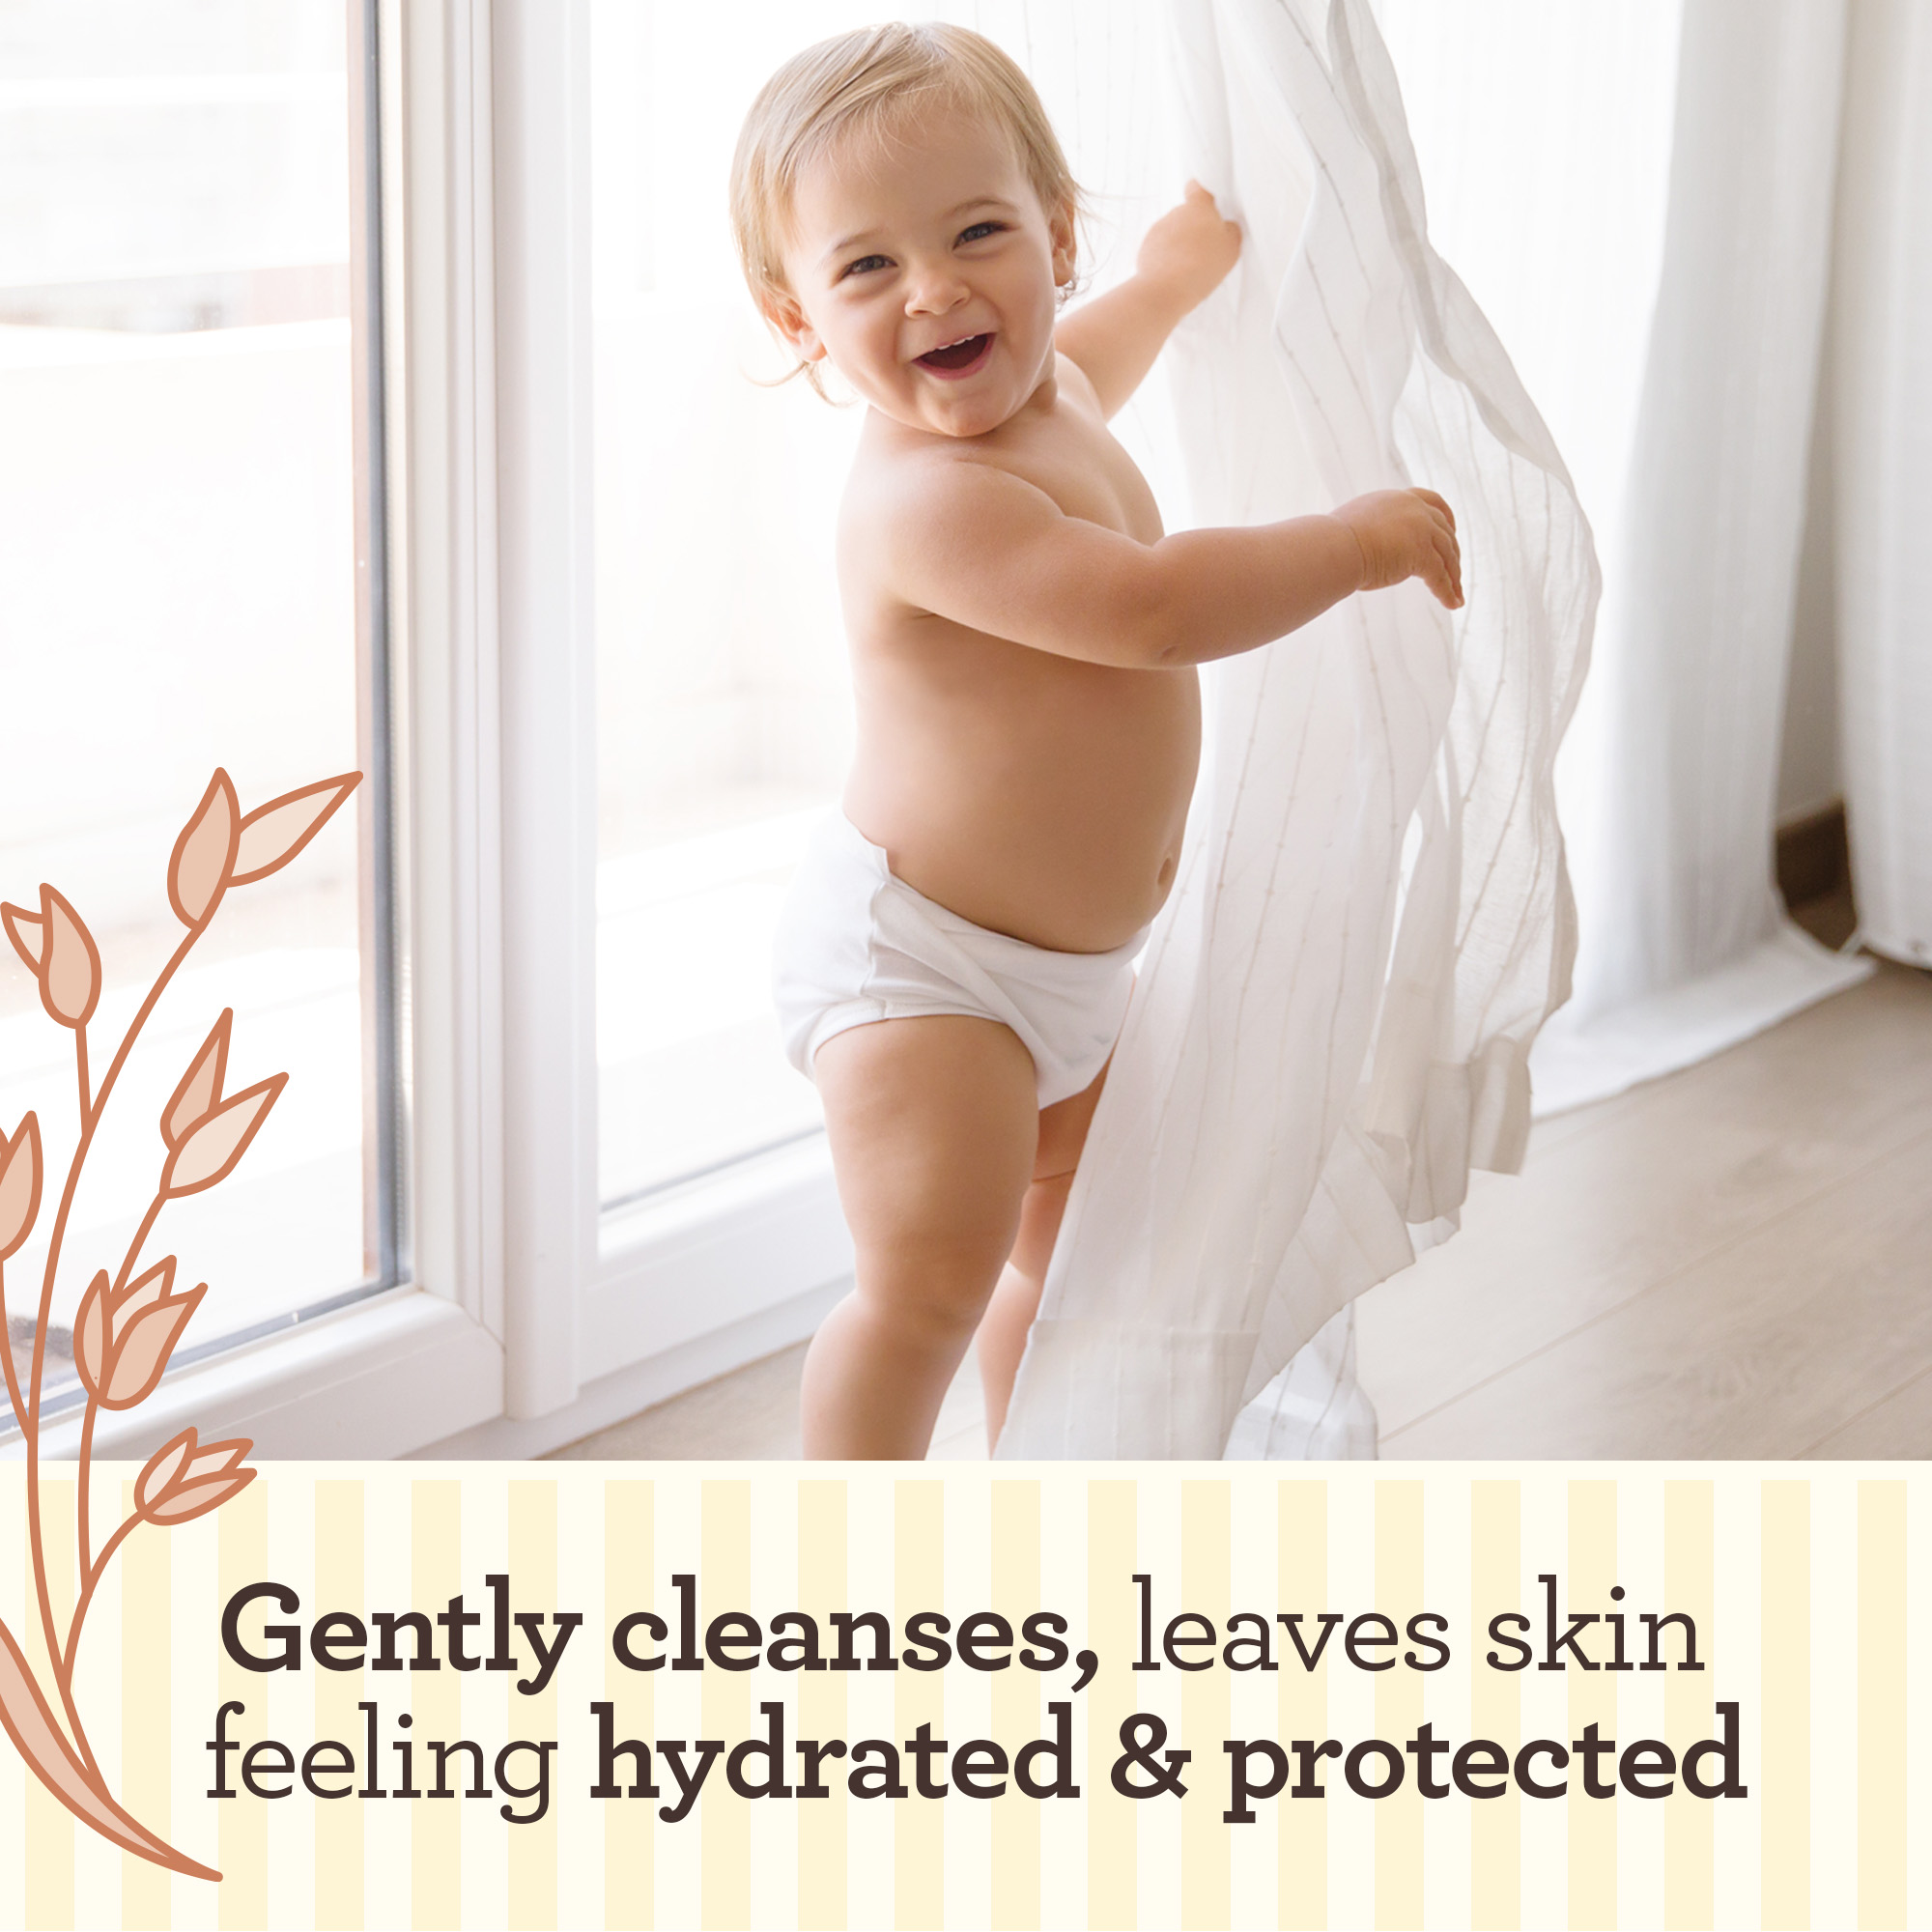 Gently cleanses, leaves skin feeling hydrated & protected